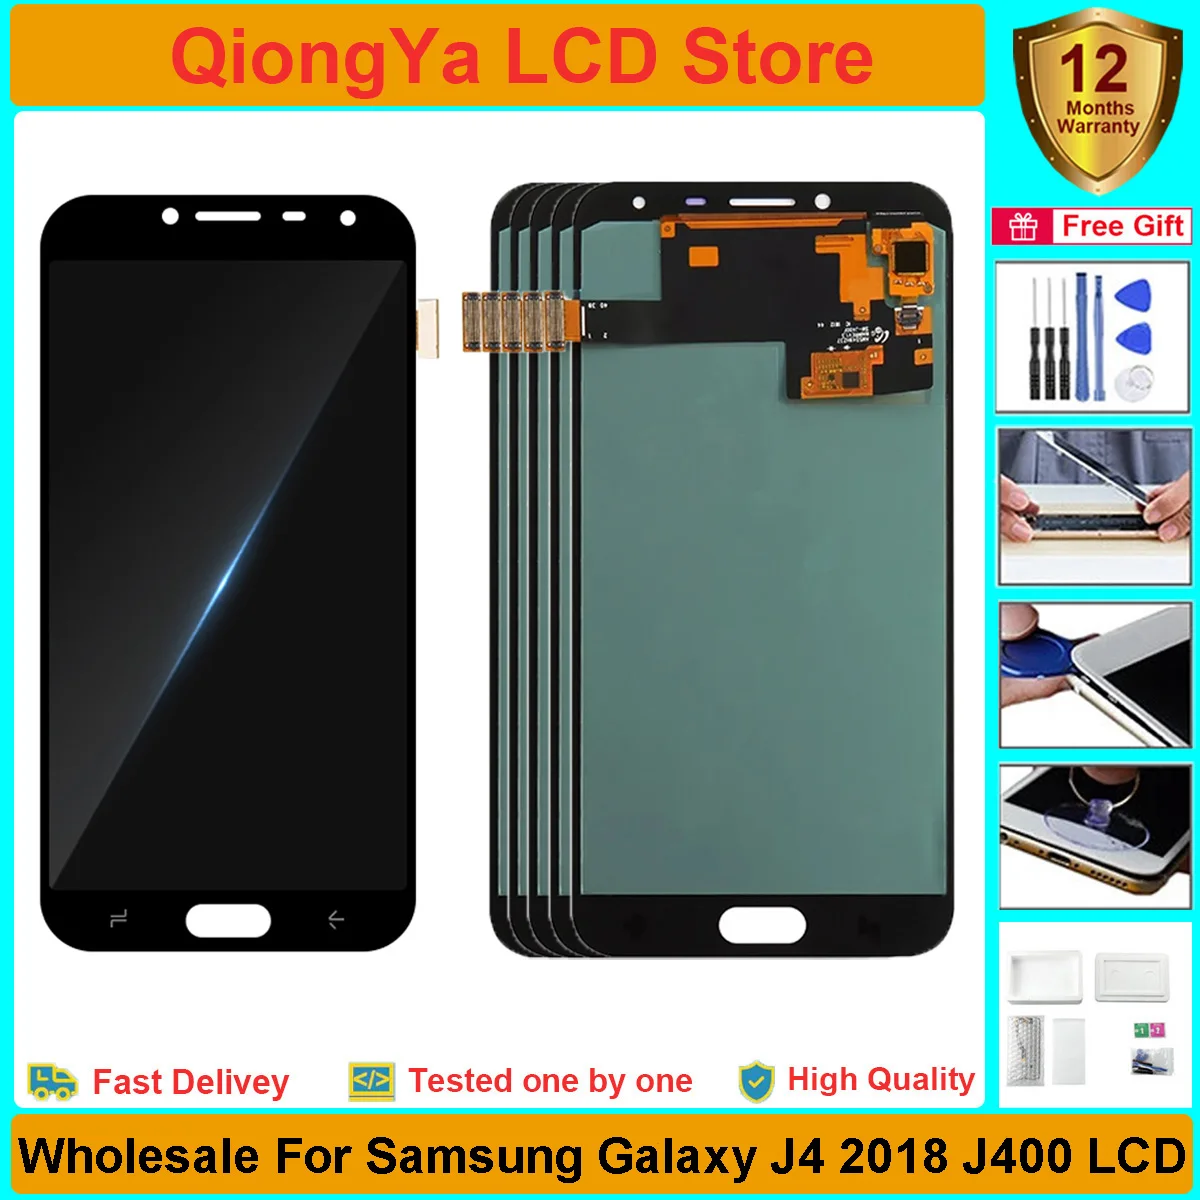 Enlarge 3/5 PCS Wholesale LCD For Samsung Galaxy J4 2018 J400 SM-J400F J400H J400M J400G/DS Display with Touch Screen Digitizer Assembly